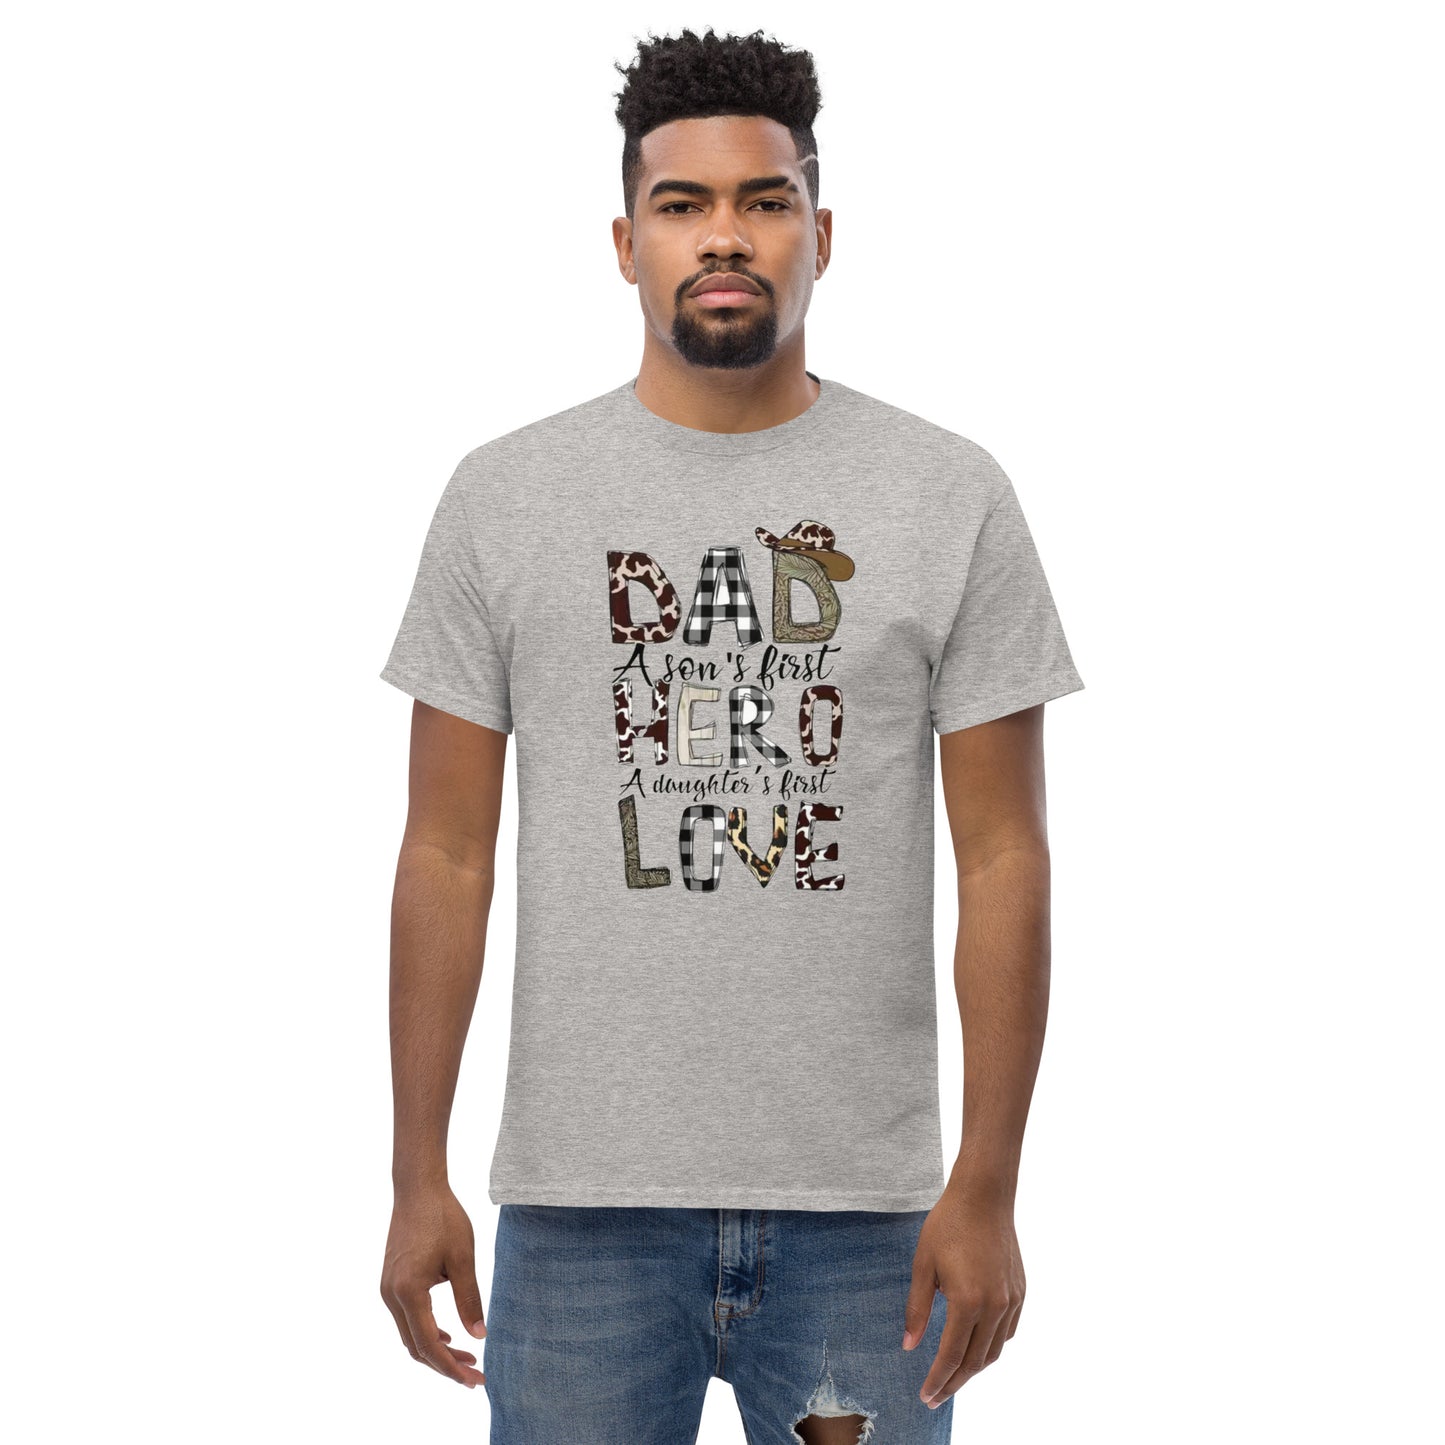 Men's T-Shirt:  Dad A Son's First Hero, A Daughter's First Love